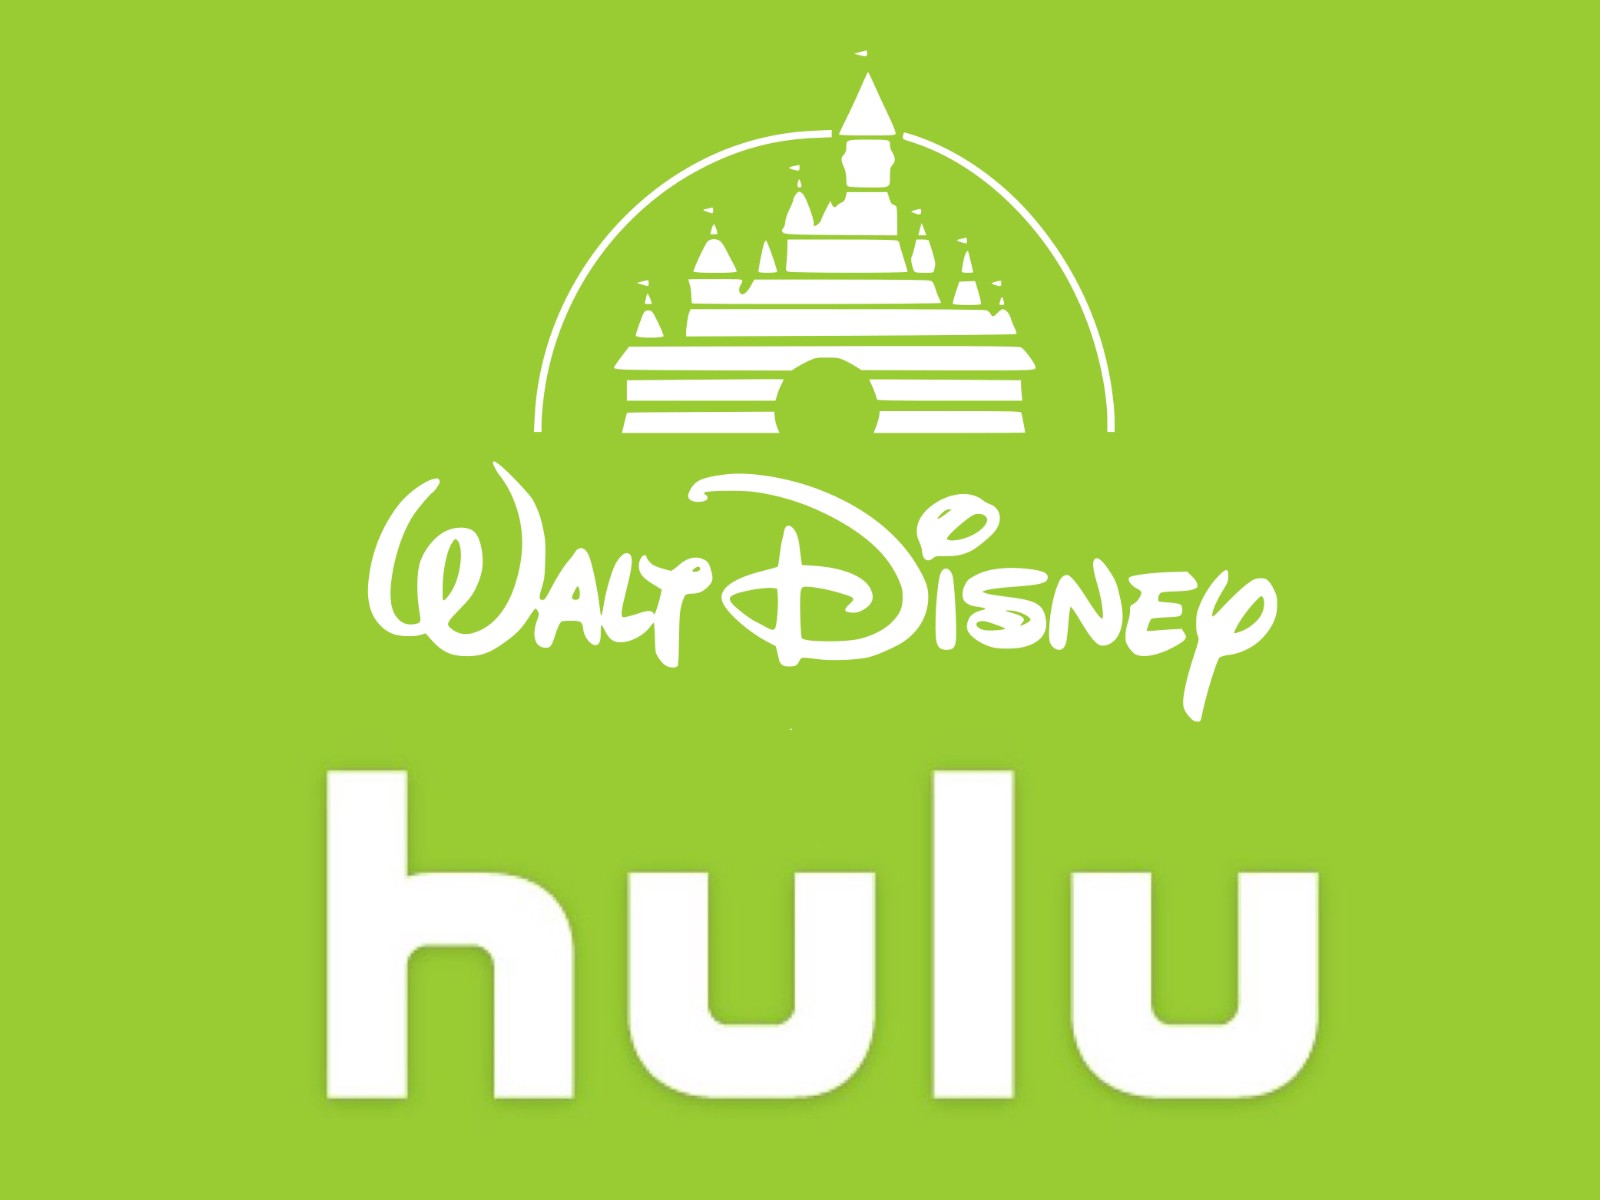 Hulu and Disney collaborated on a new study to see what kind of binge watchers there are. What type of streamer do you fit with?